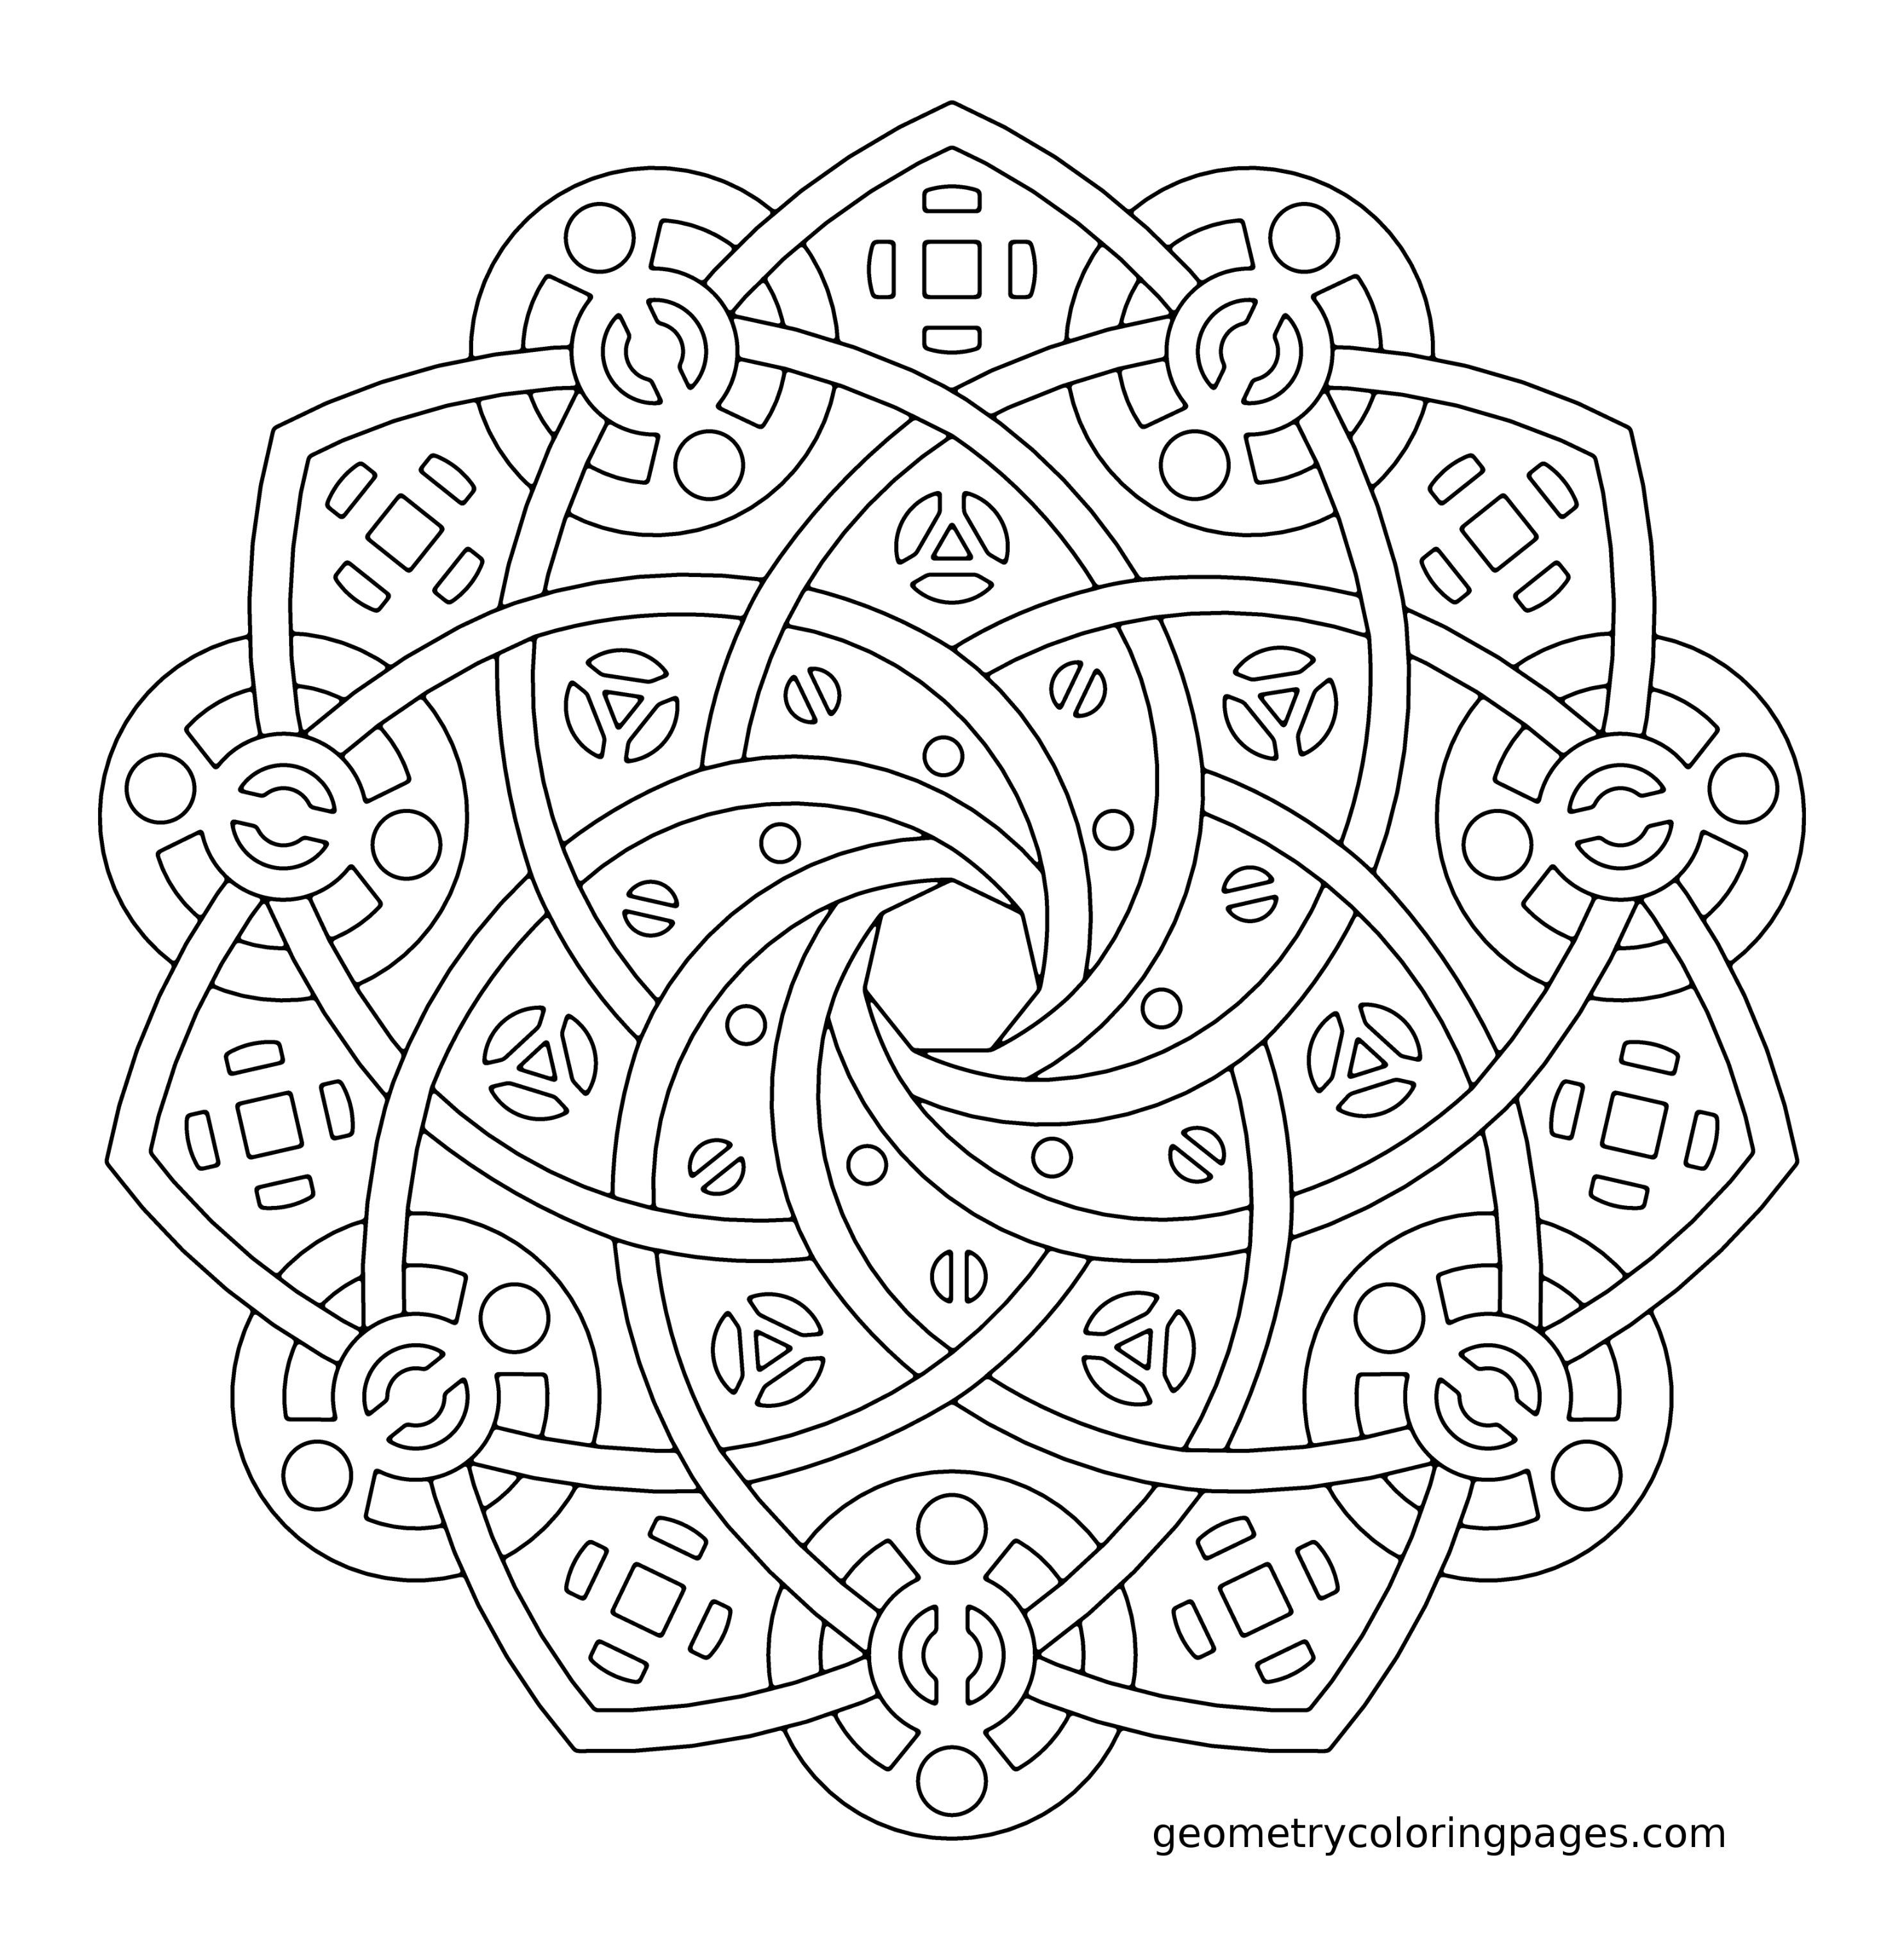 Coloring Illusion Geometric Coloring Pages Square Radial Lines A ...